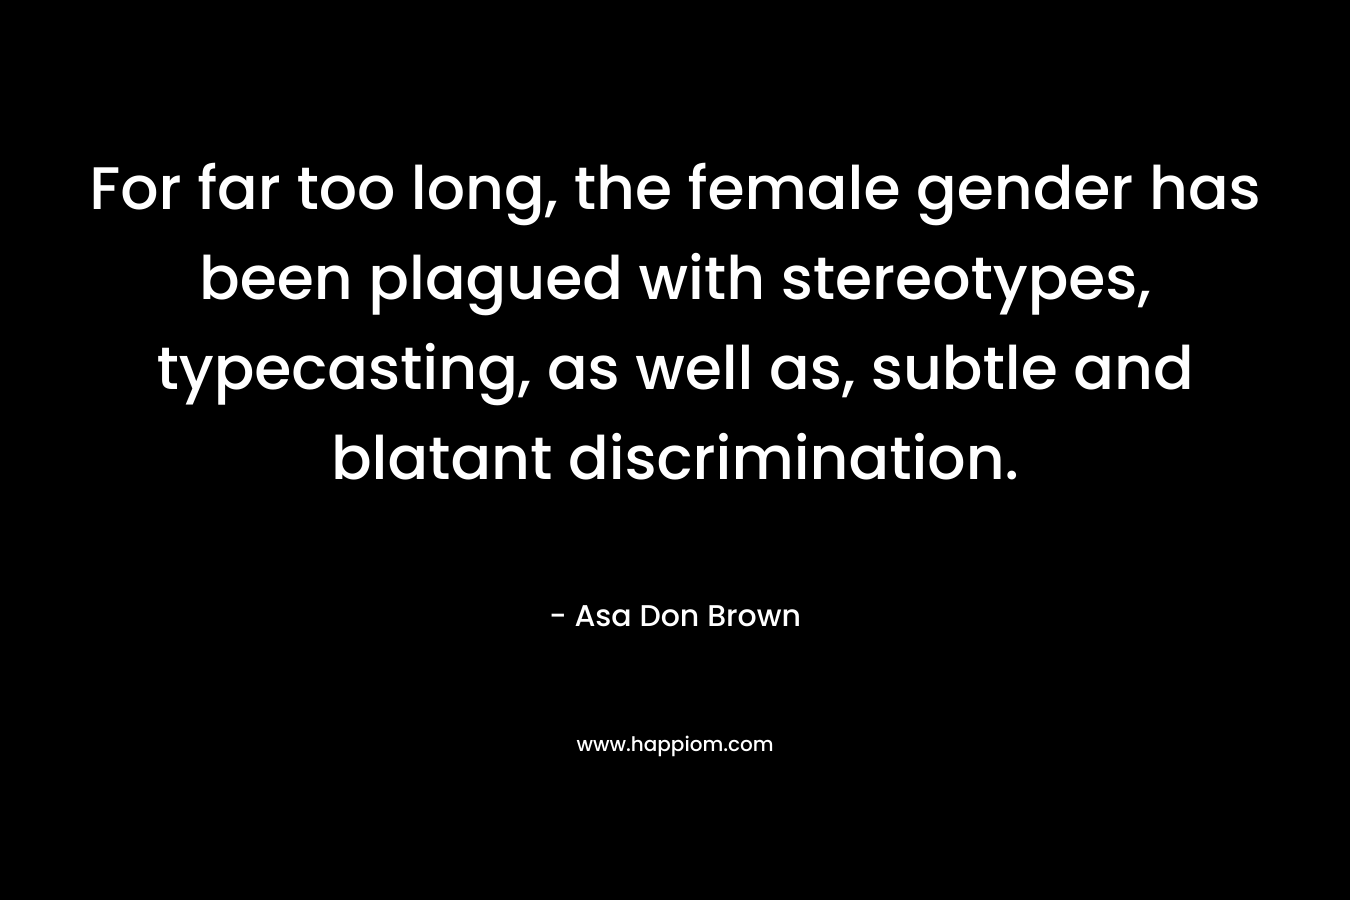 For far too long, the female gender has been plagued with stereotypes, typecasting, as well as, subtle and blatant discrimination. – Asa Don Brown